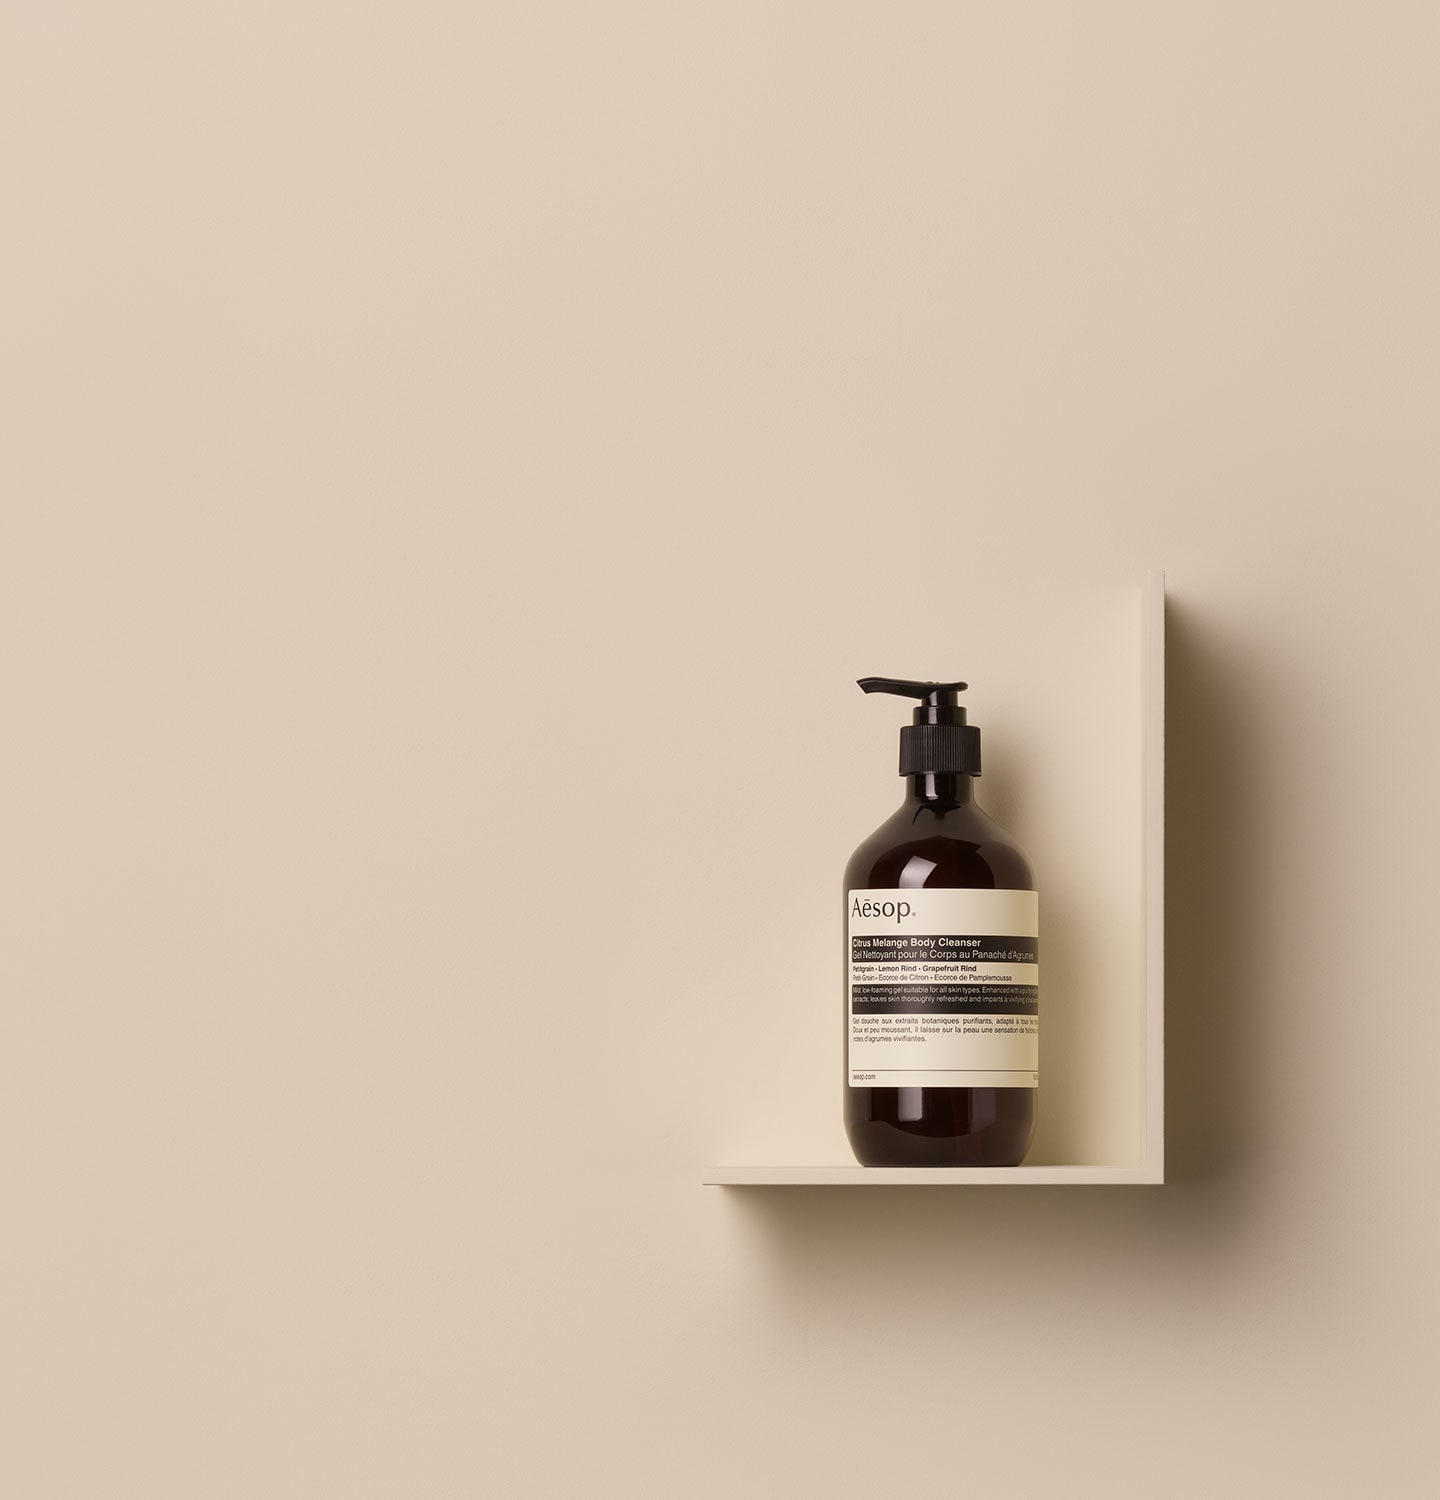 Aesop Citrus Melange Body Cleanser in 500ml amber bottle with pump, placed on a shelf in a beige background